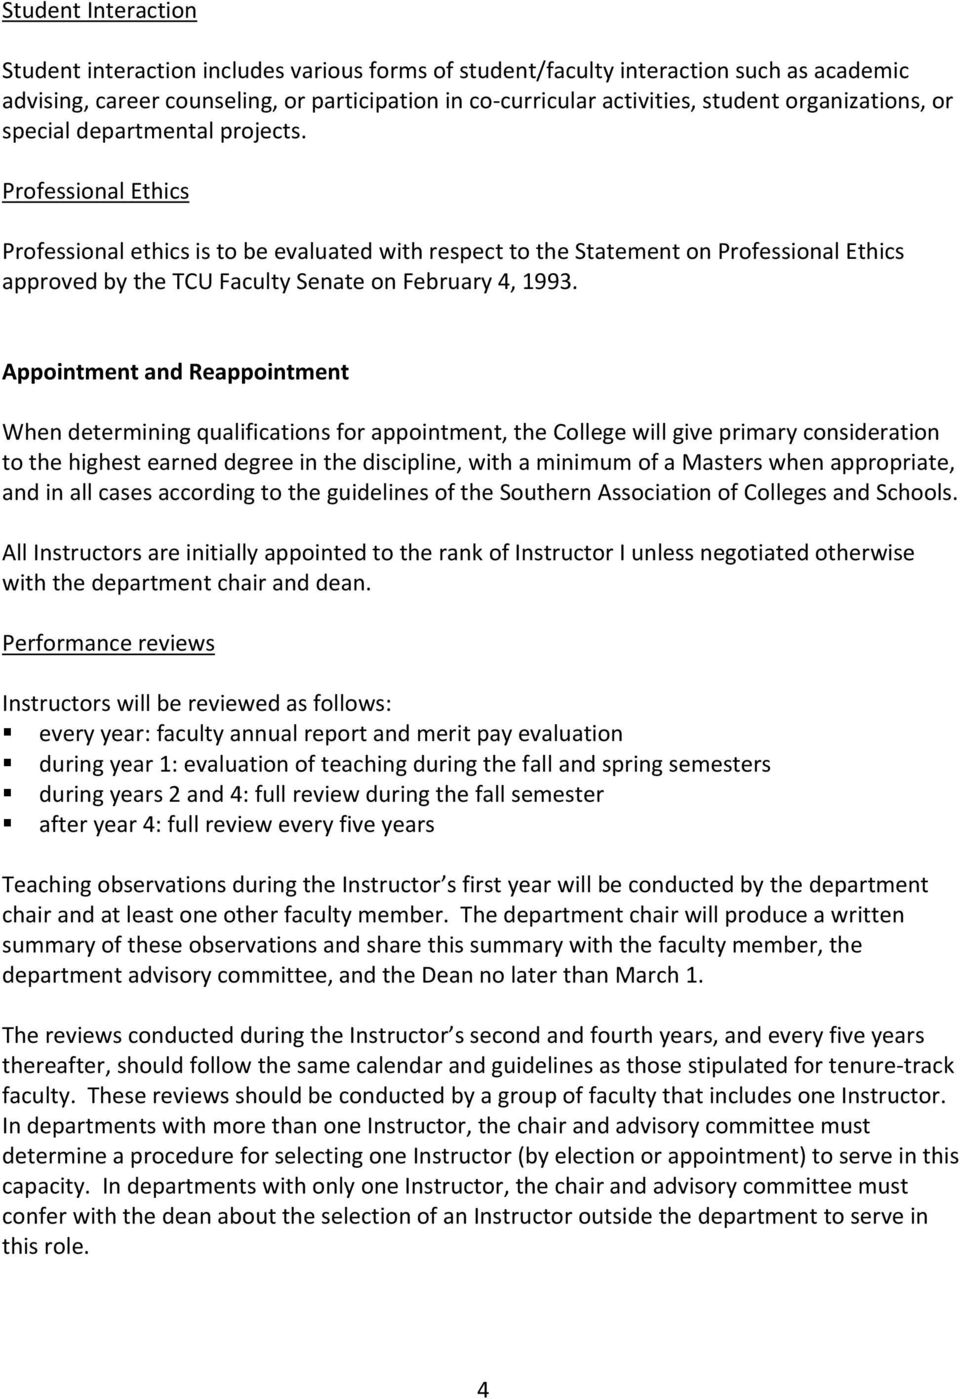 Professional Ethics Professional ethics is to be evaluated with respect to the Statement on Professional Ethics approved by the TCU Faculty Senate on February 4, 1993.